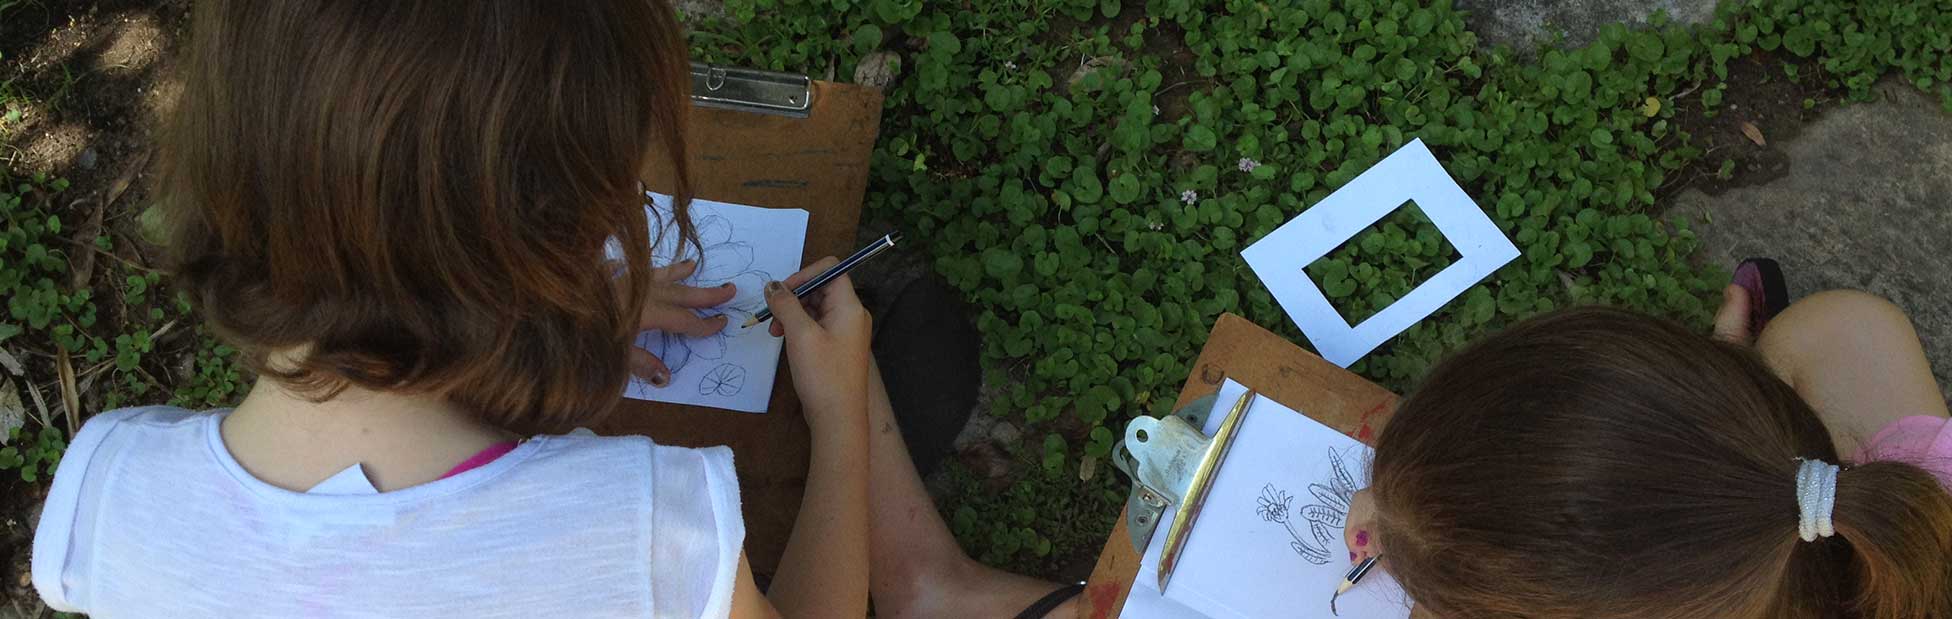 Girls in garden drawing on paper mounted on clipboards